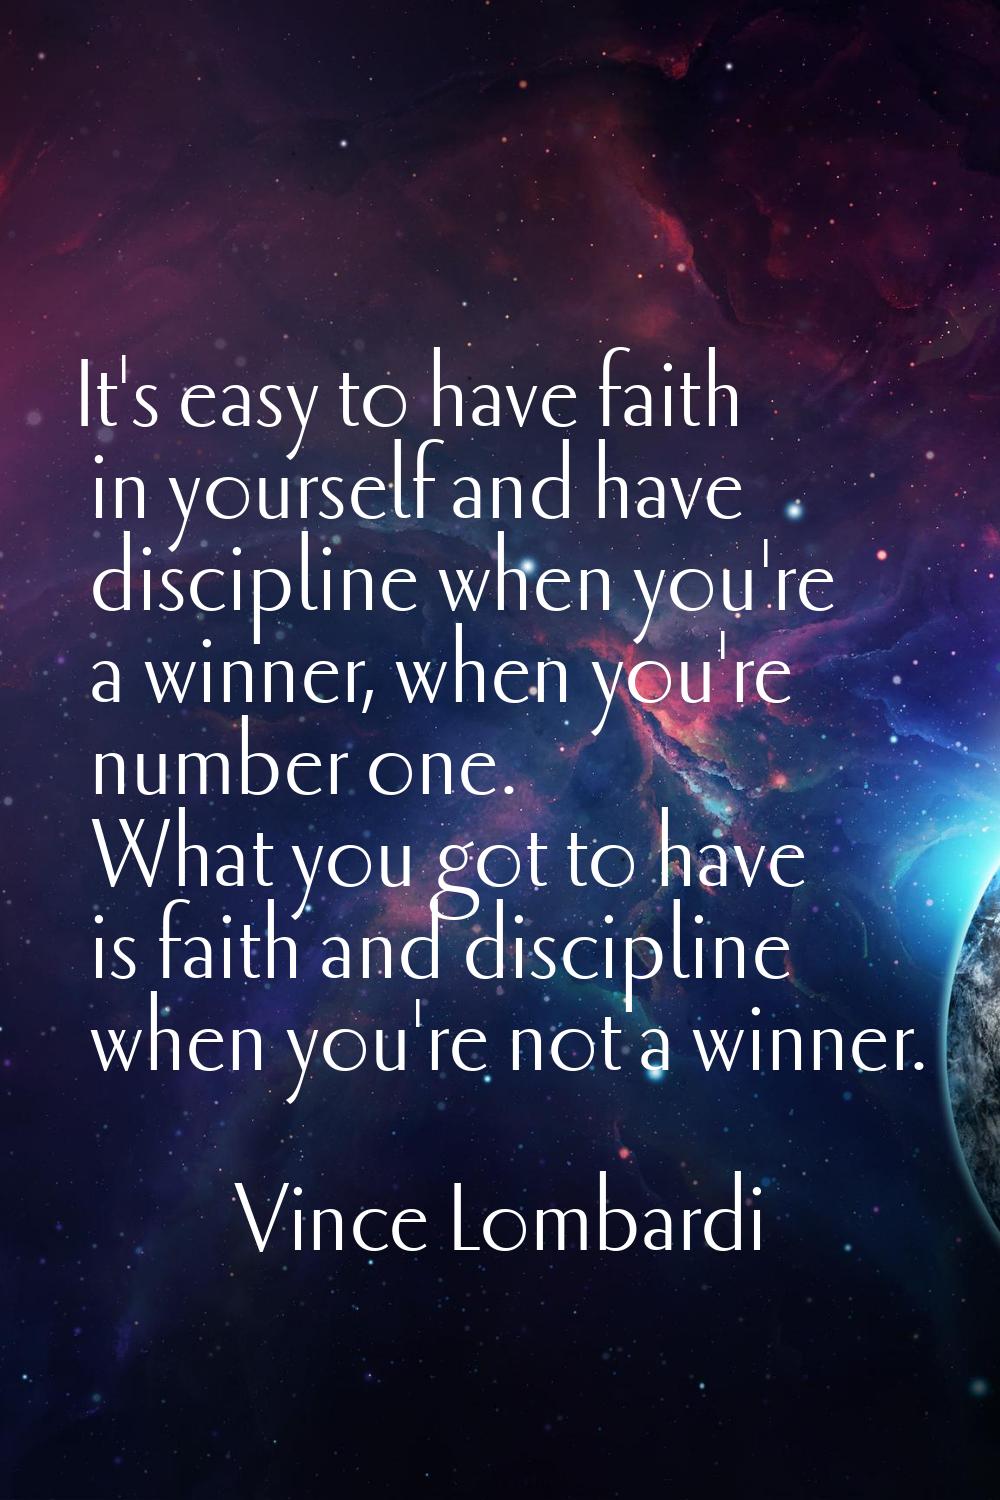 It's easy to have faith in yourself and have discipline when you're a winner, when you're number on